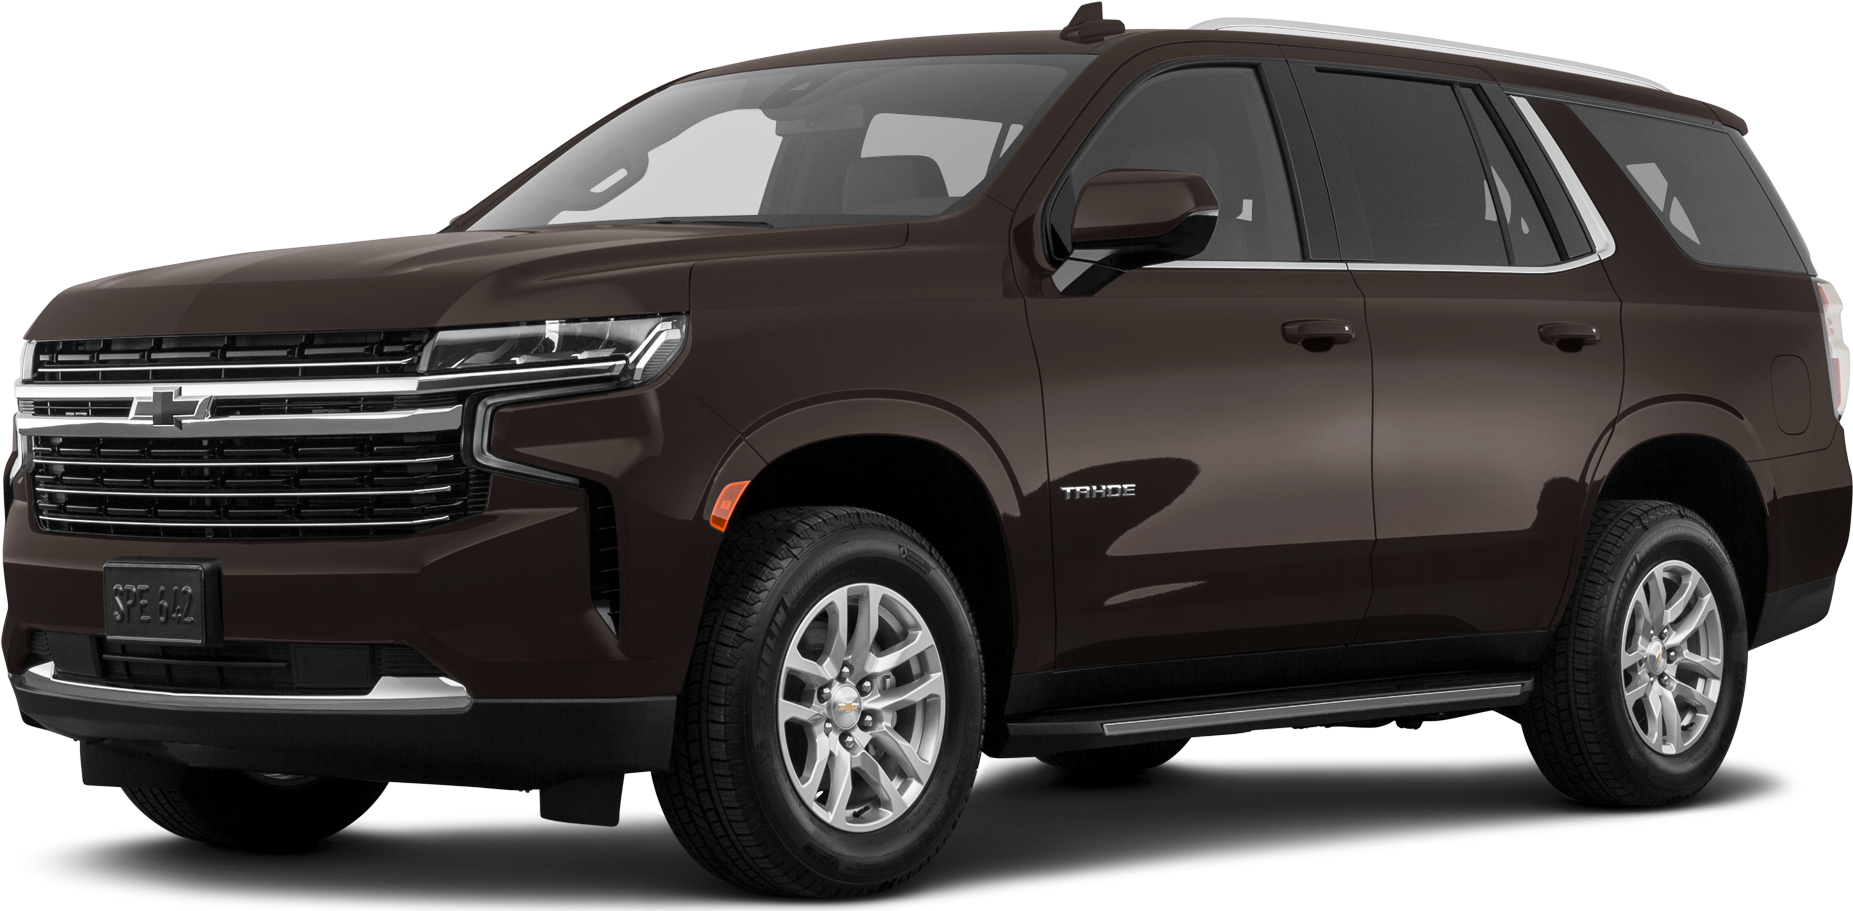 2021 Chevy Tahoe Price Reviews Pictures And More Kelley Blue Book